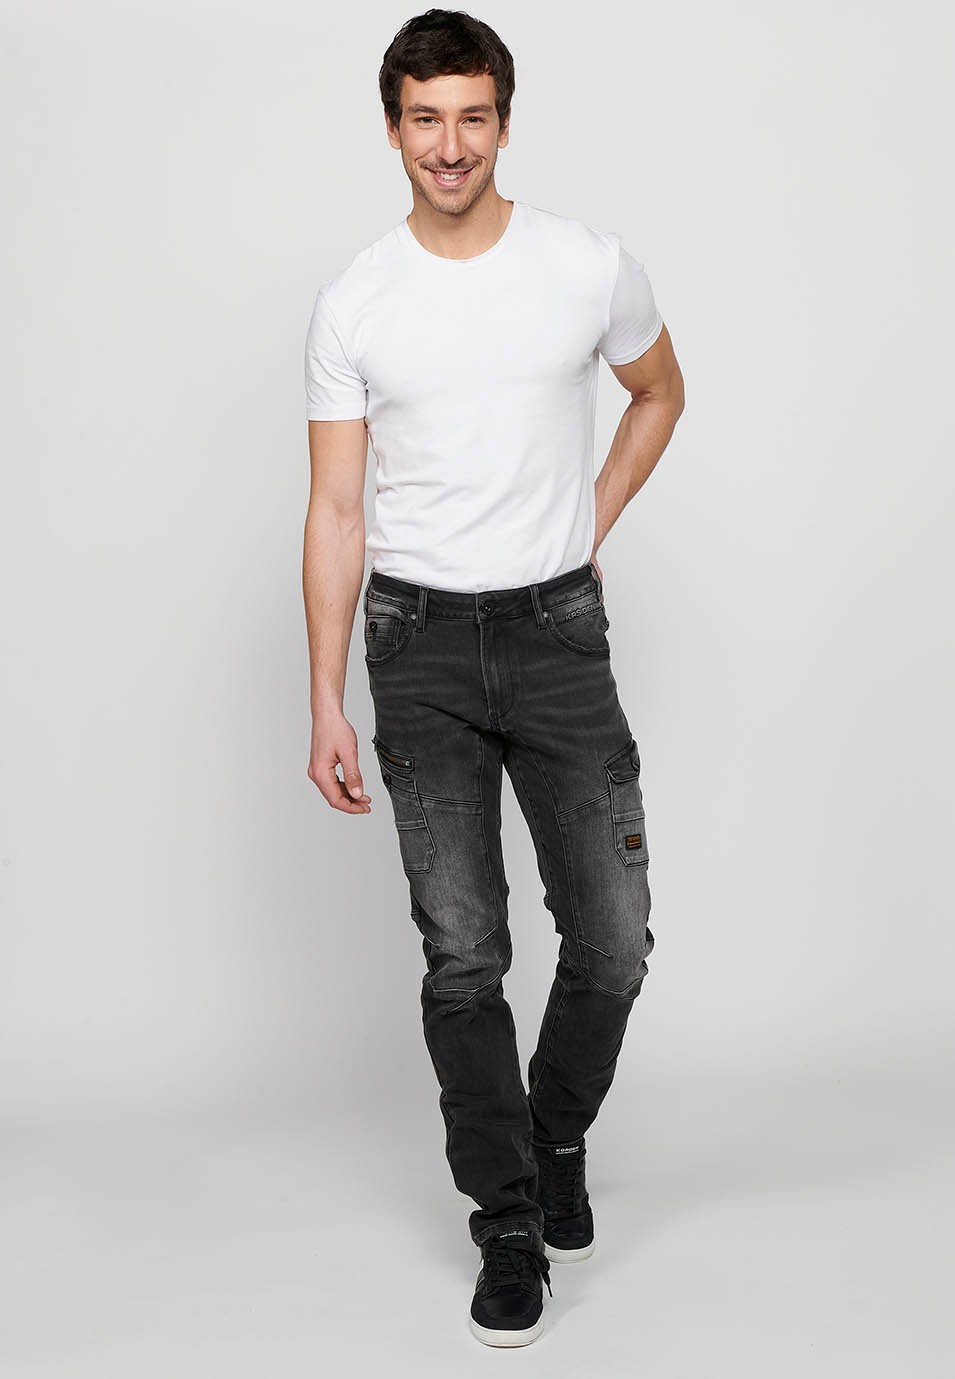 Long denim pants with front closure with zipper and button and pockets, two sides in Black for Men